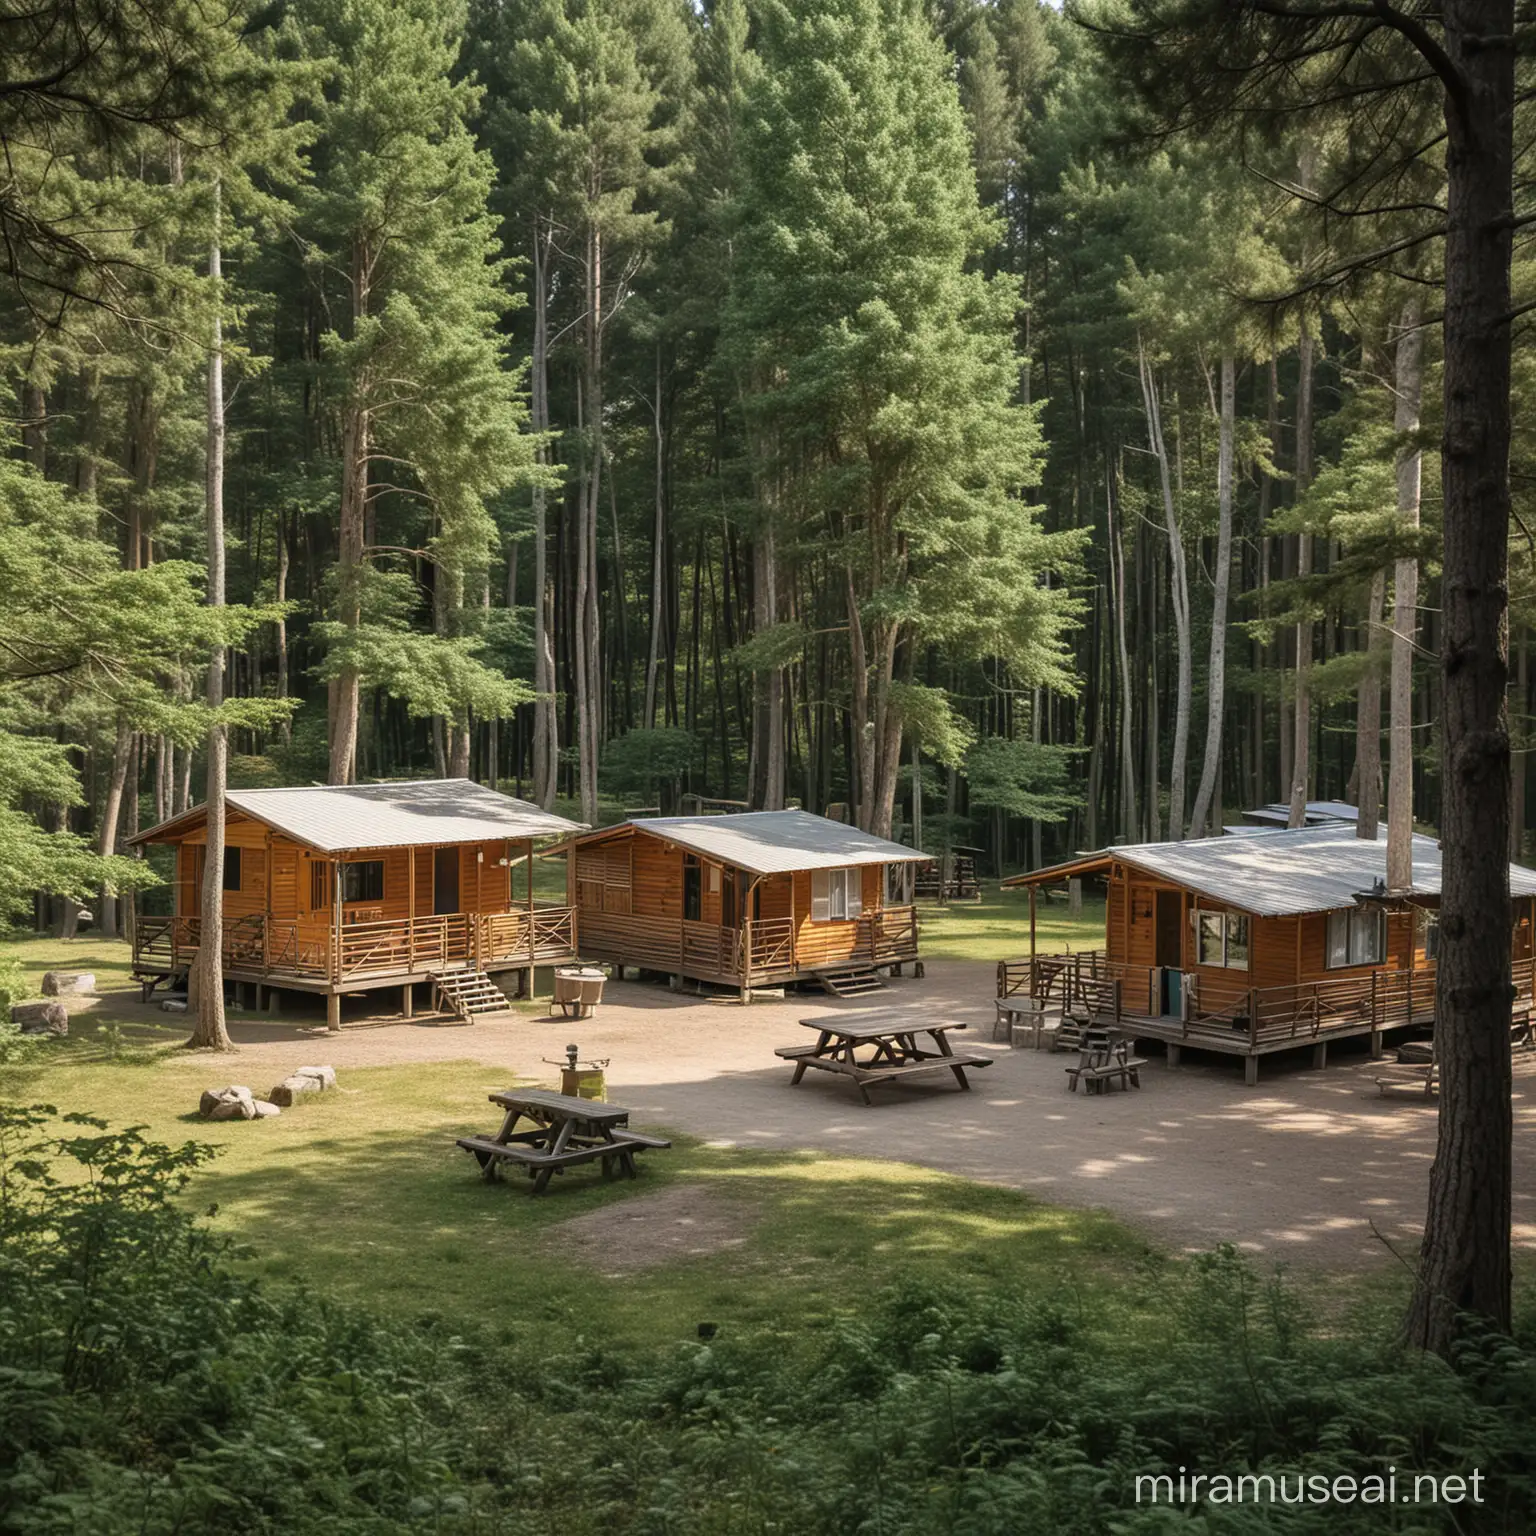 Serene Campsite with Rustic Wooden Cabins Surrounded by Towering Trees